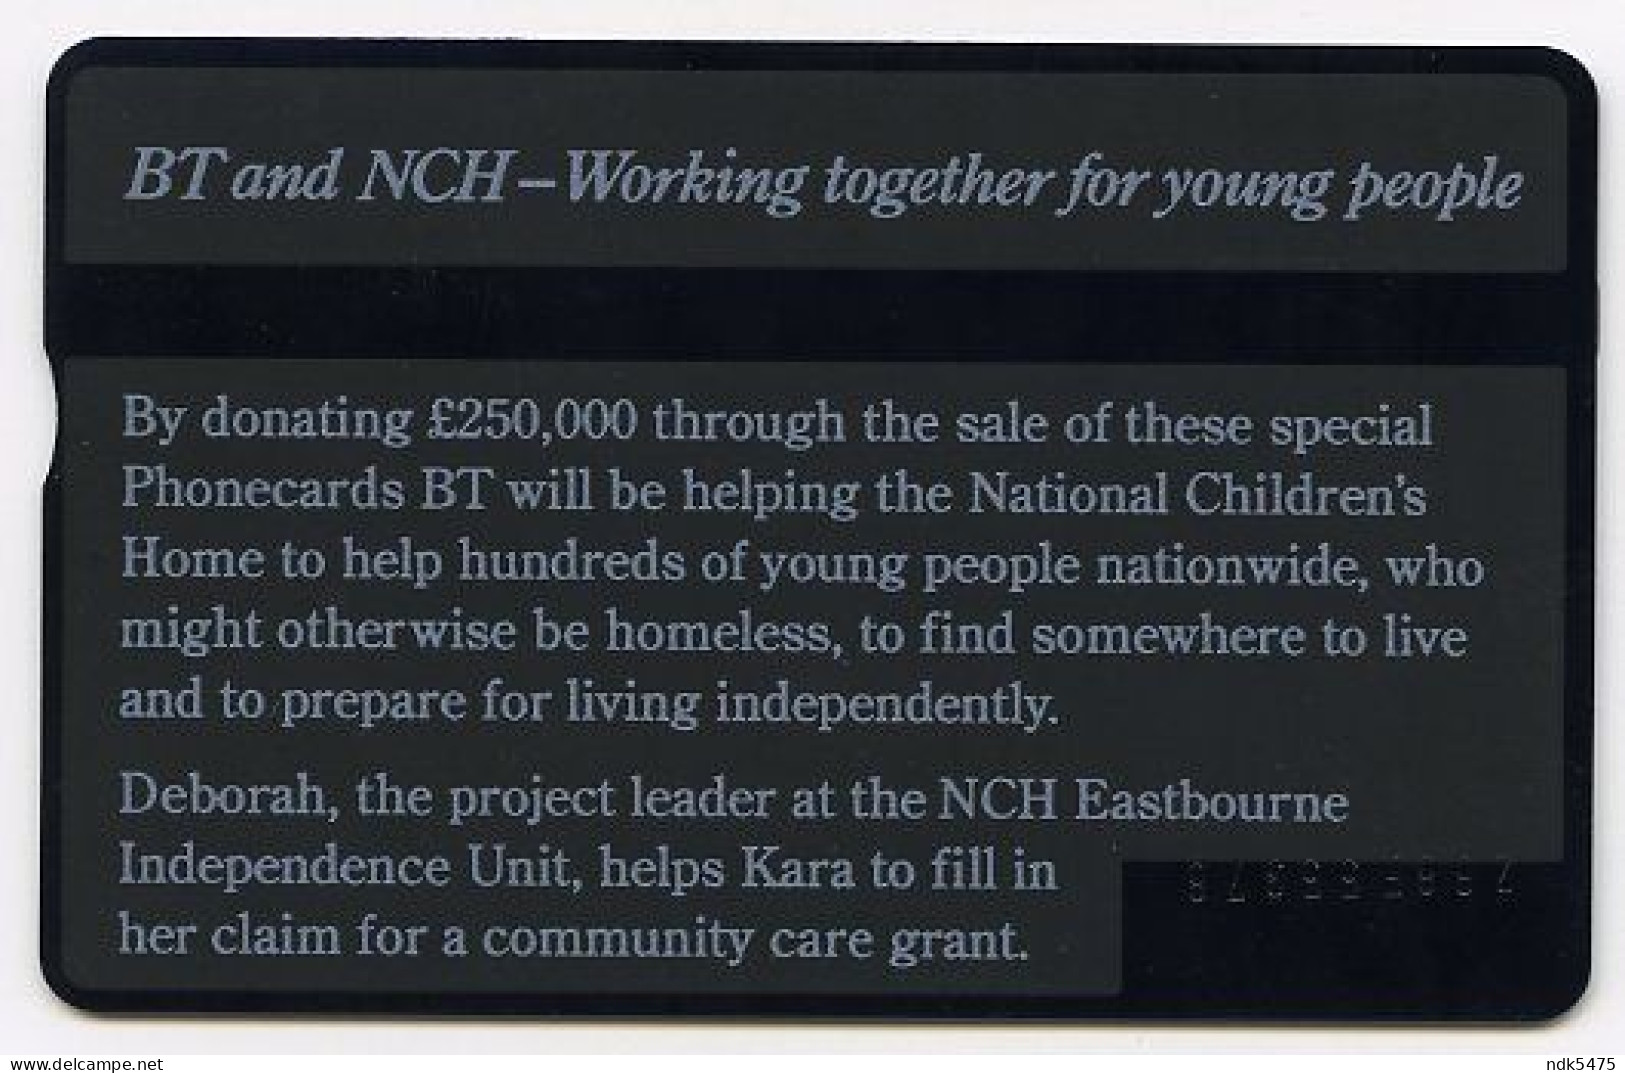 BT PHONECARD : NATIONAL CHILDREN'S HOME (NCH EASTBOURNE) : 20 UNITS - BT Advertising Issues